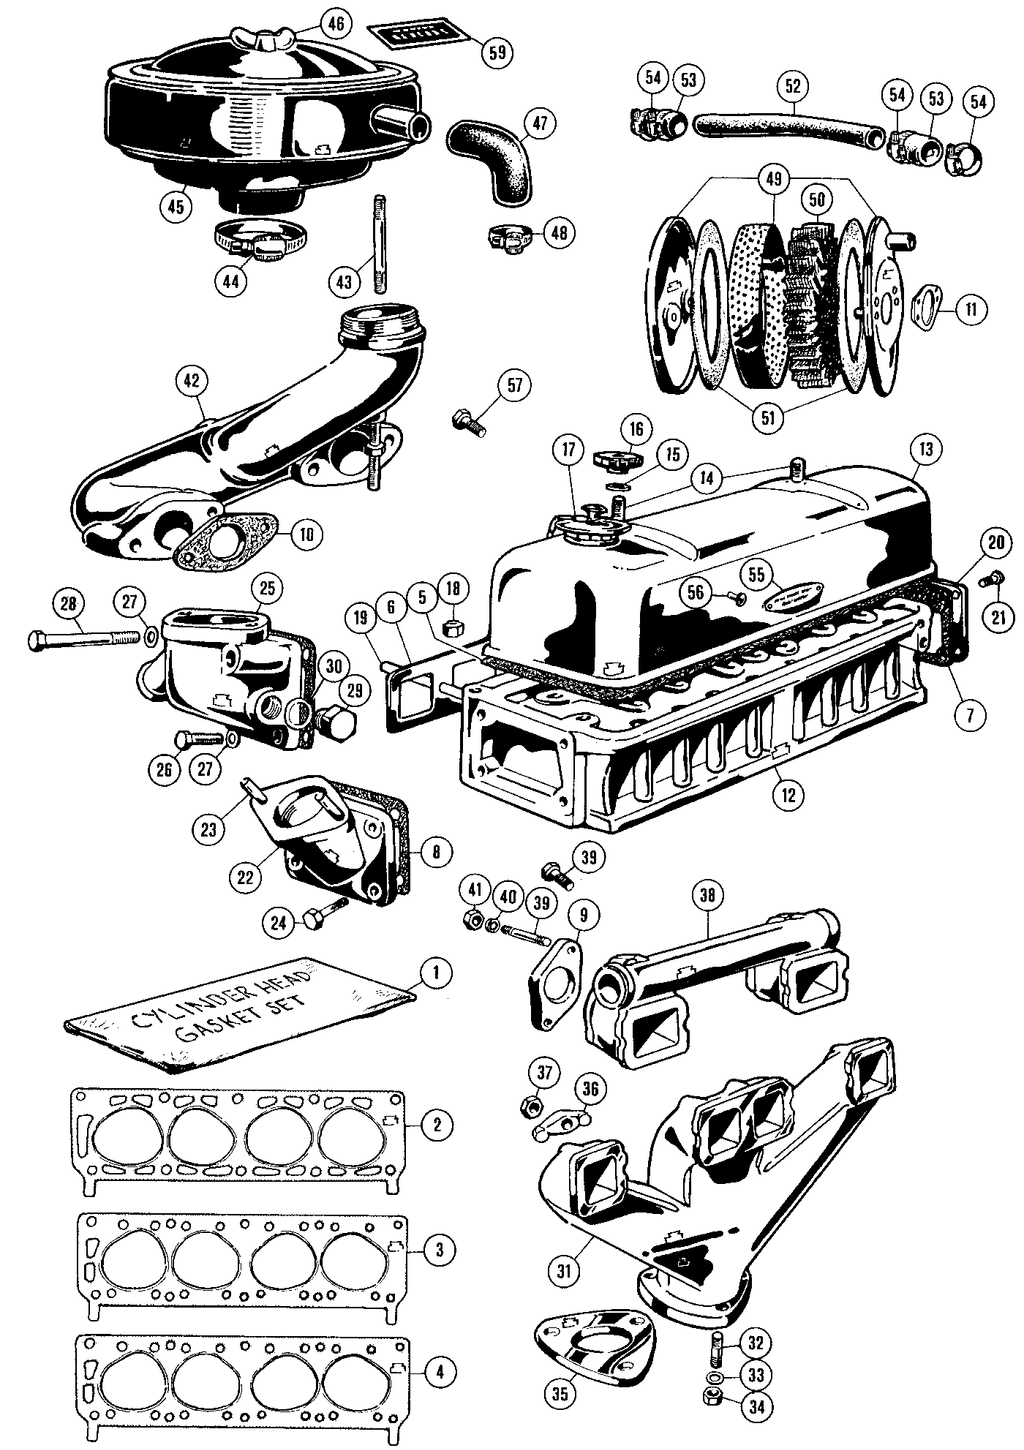 MGTD-TF 1949-1955 - Air induction systems - Cylinder head - 1